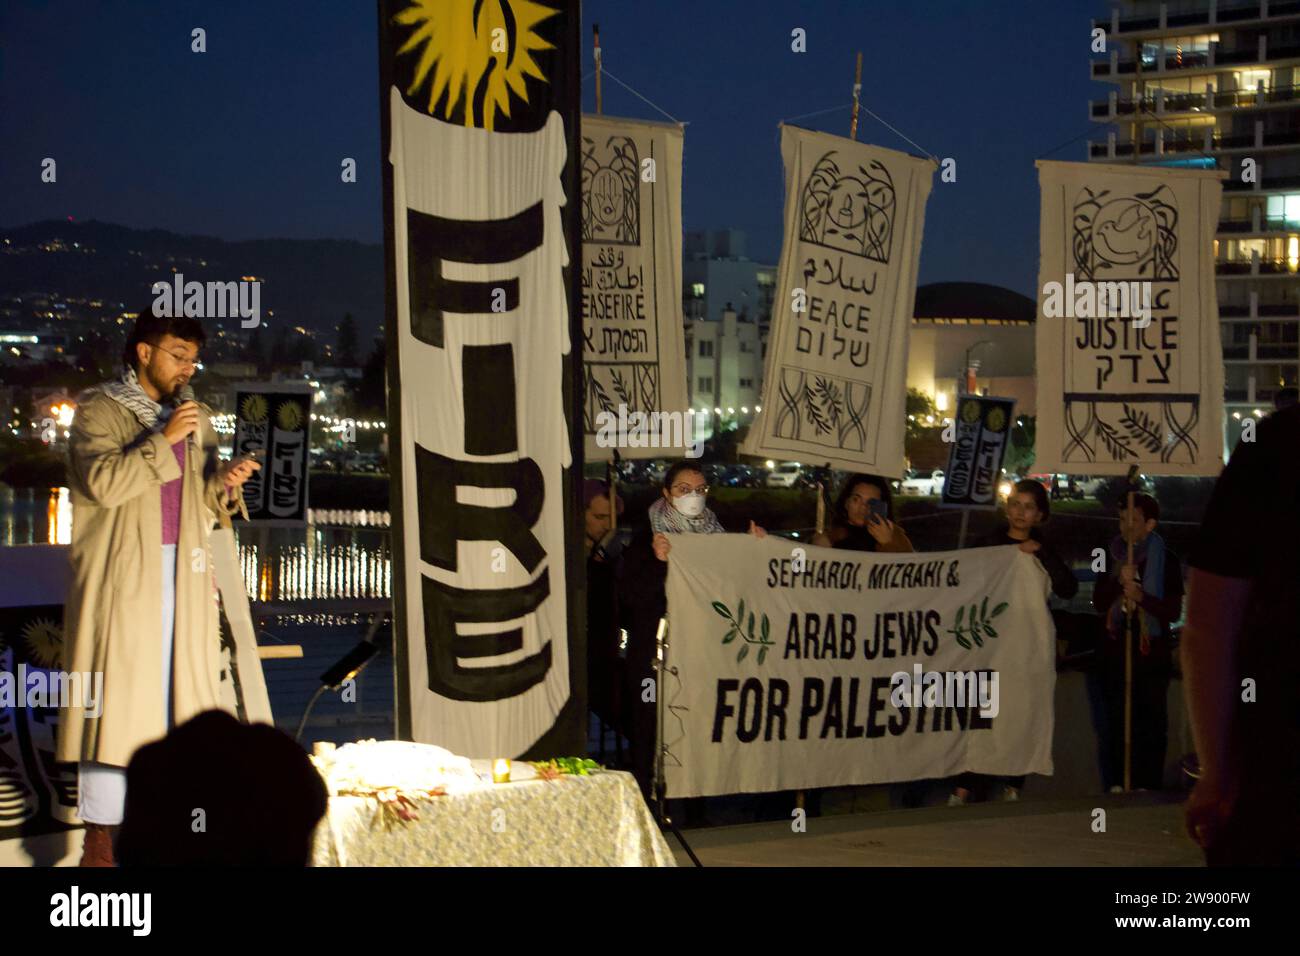 Oakland, California, USA. 22 Dec 2023. Bay Area Jews for Ceasefire Rally and Shabbat. Members of Jewish Voices for Peace gather for prayer to support Palestine and protest against bombing in Gaza and the killing of Gazans. An Arab Jew speaks to the group. Credit: Kristin Cato/Alamy Lives News Stock Photo